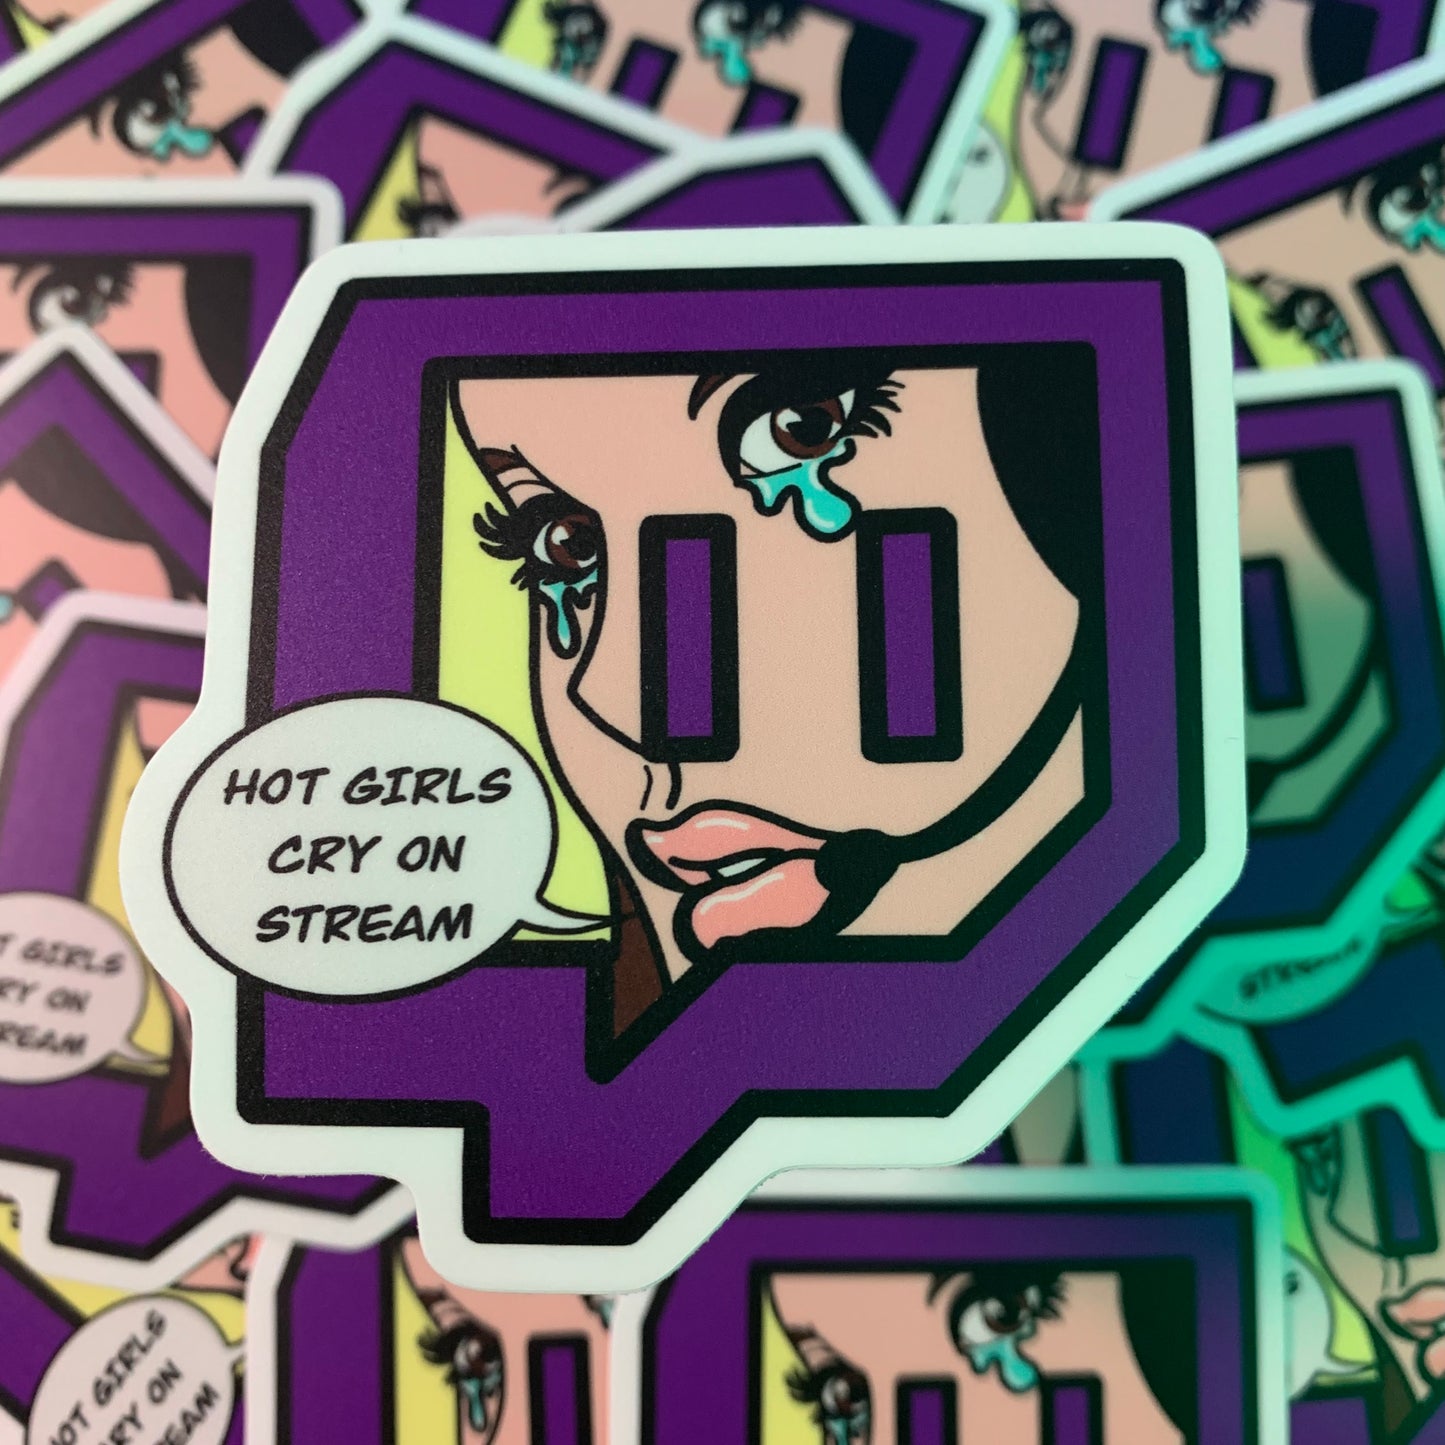 This sticker is in the shape of the twitch logo, with a cartoon woman in a comic book style crying within it, with "hot girls cry on stream" inside a talk bubble.